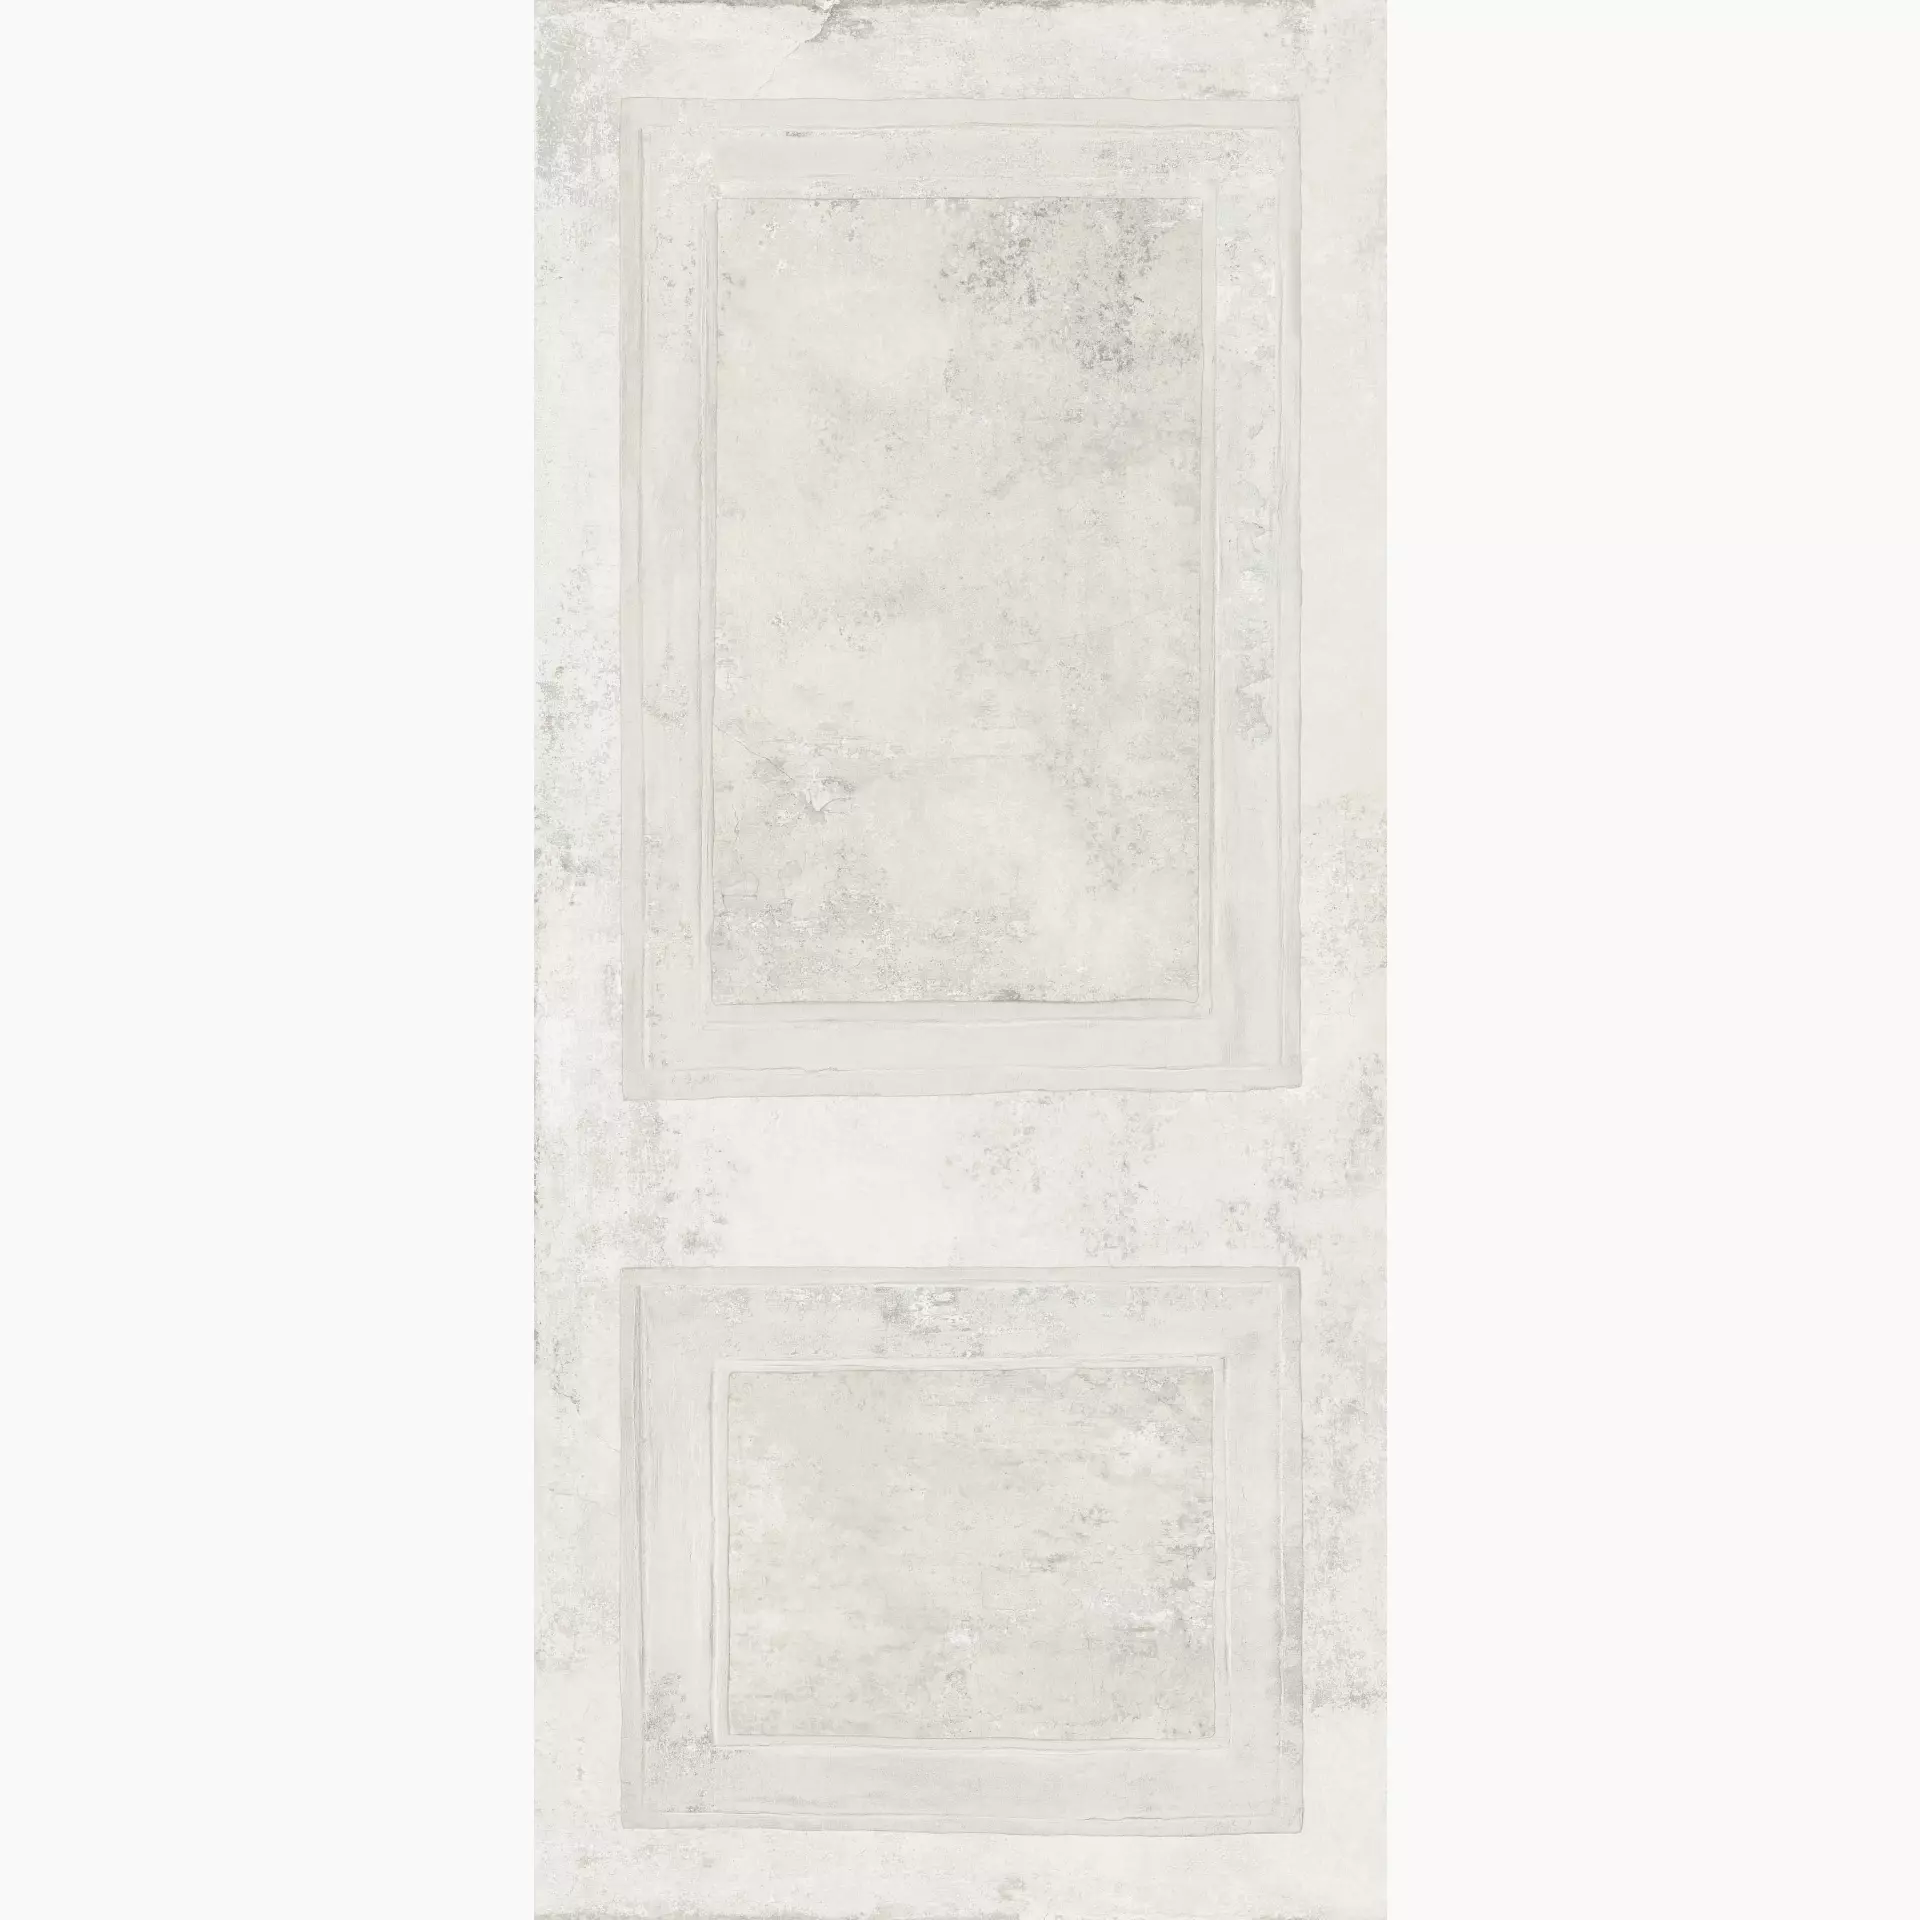 ABK Ghost Ivory Naturale Boiserie PF60008197 120x280cm rectified 6mm